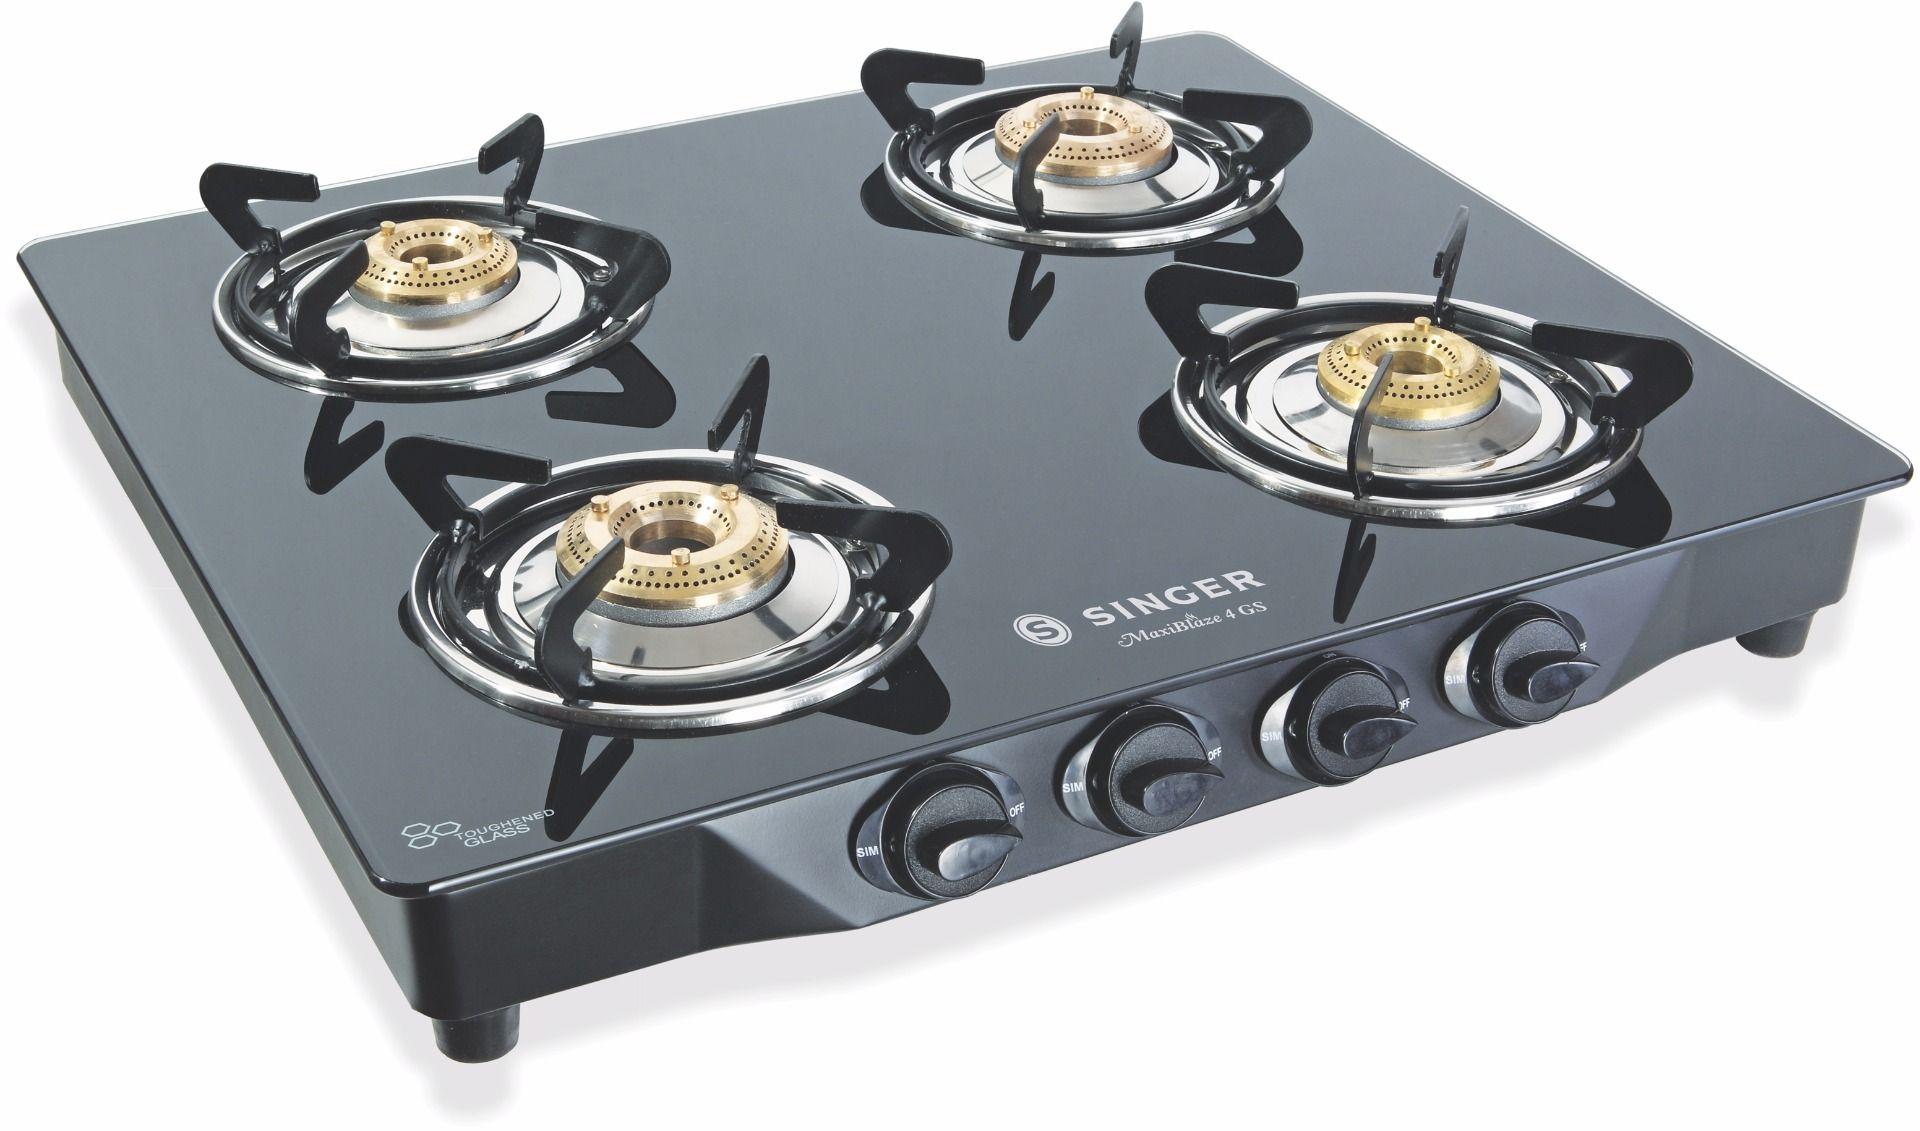 Gas Chulha – Buy Latest Gas Stove Online at Best Price - Singer India